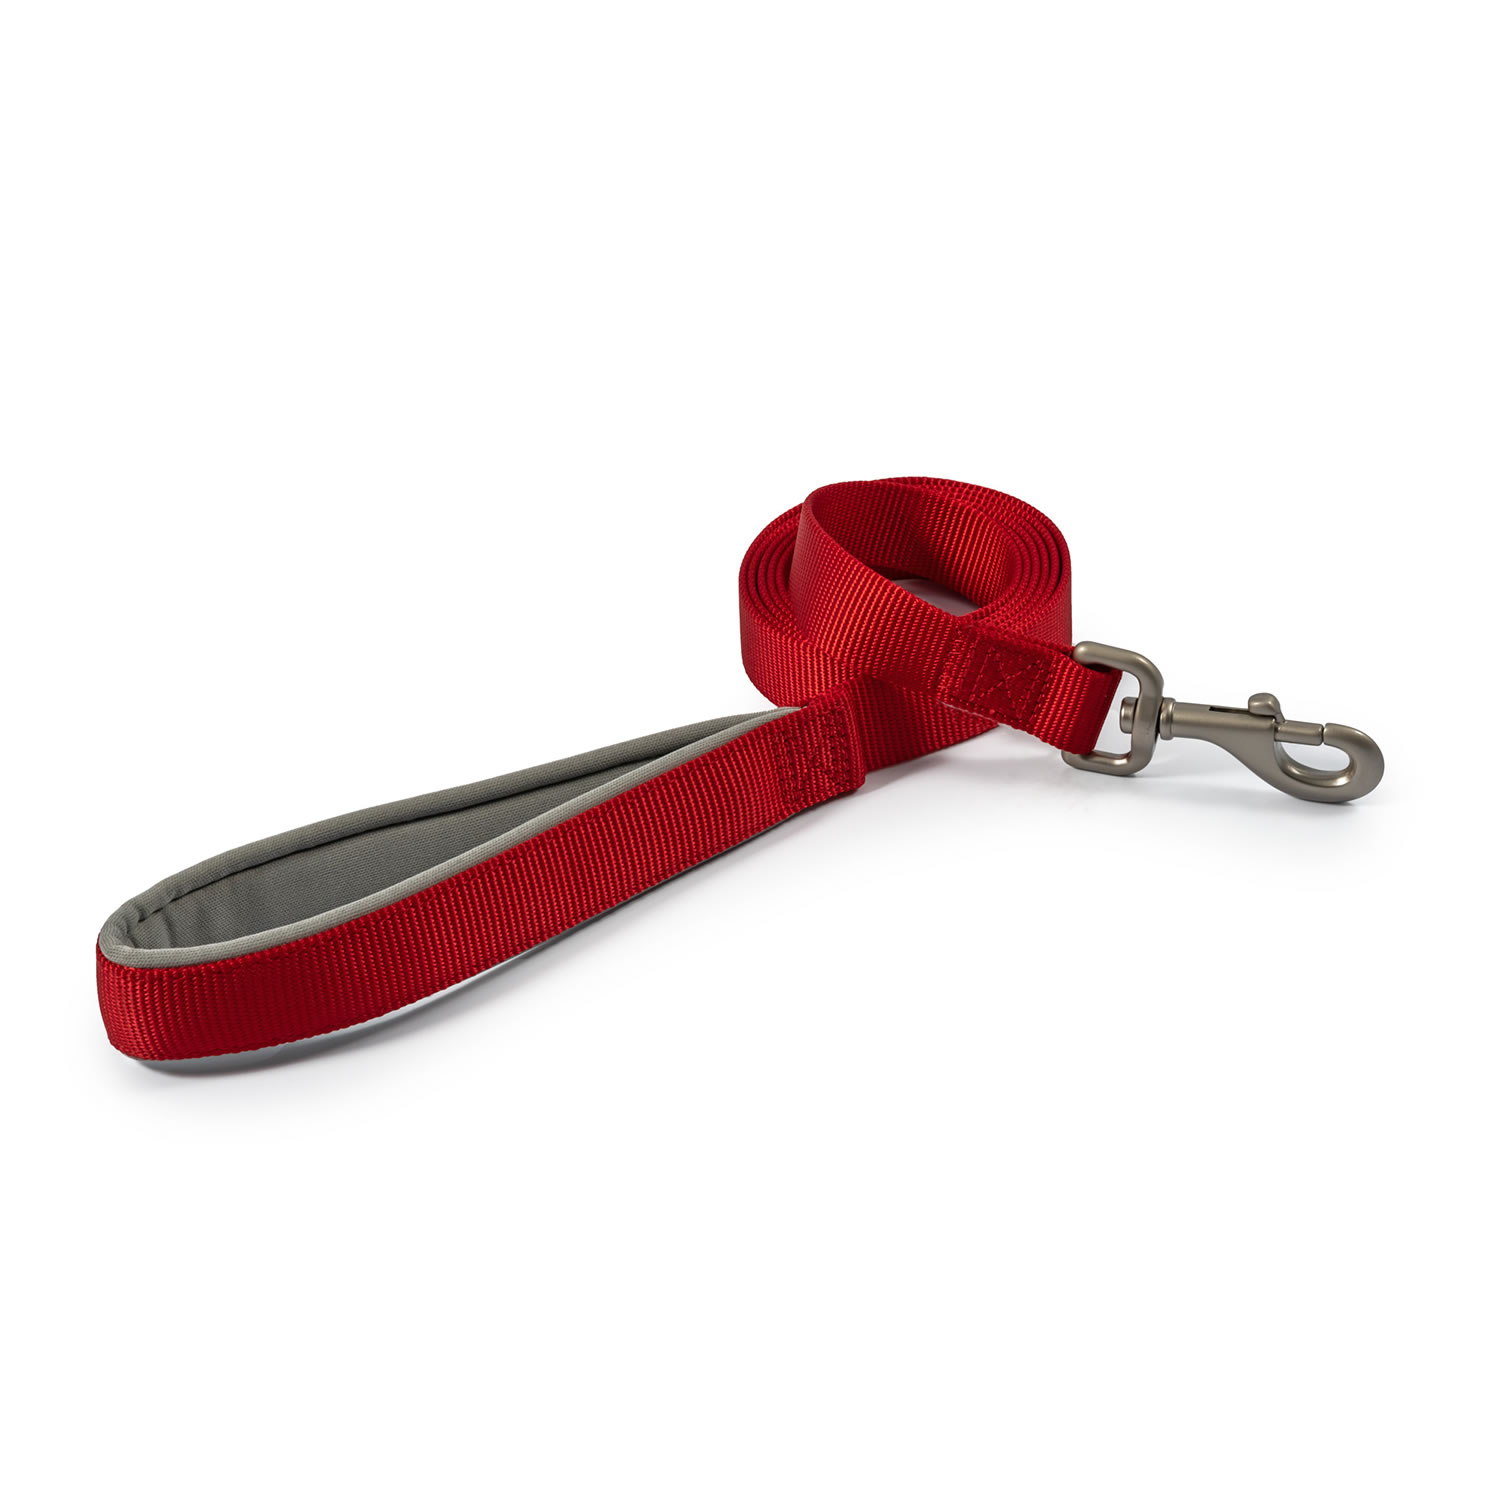 ANCOL VIVA PADDED LEAD ANCOL VIVA PADDED LEAD 1.8 M X 25 MM RED 1.8 M X 25 MM